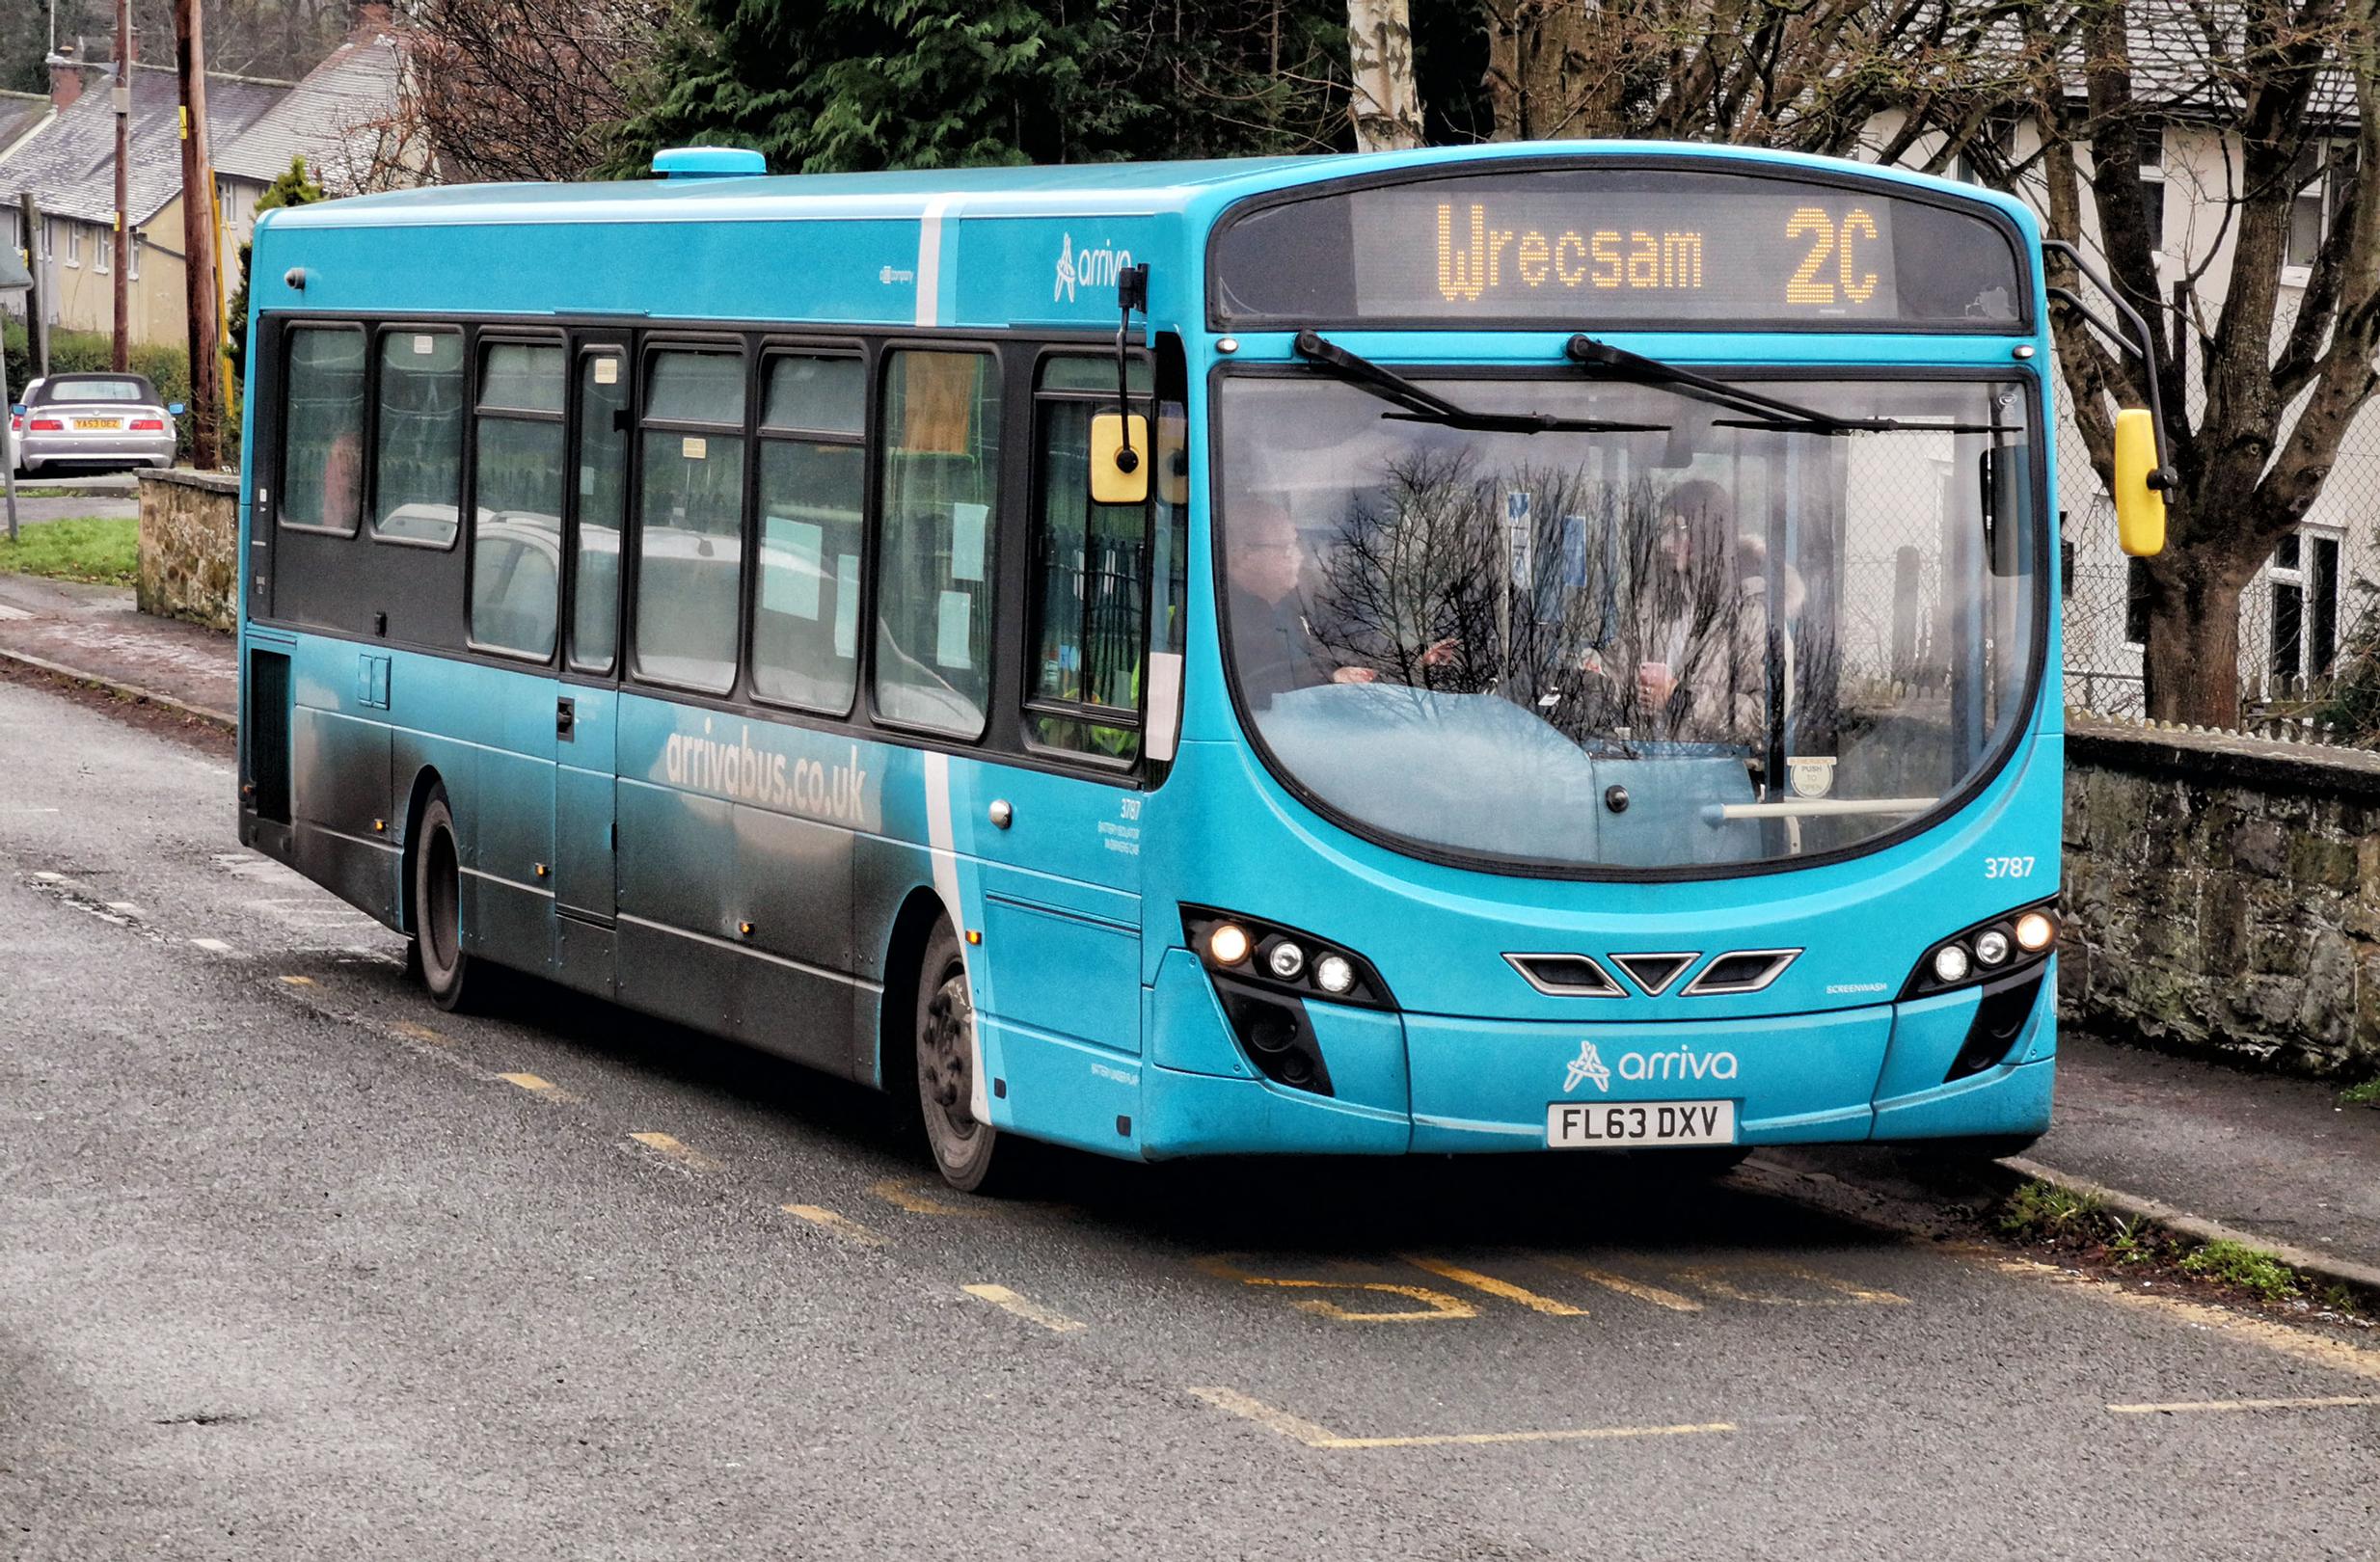 Appraisal period for bus infrastructure is doubled by Welsh Government